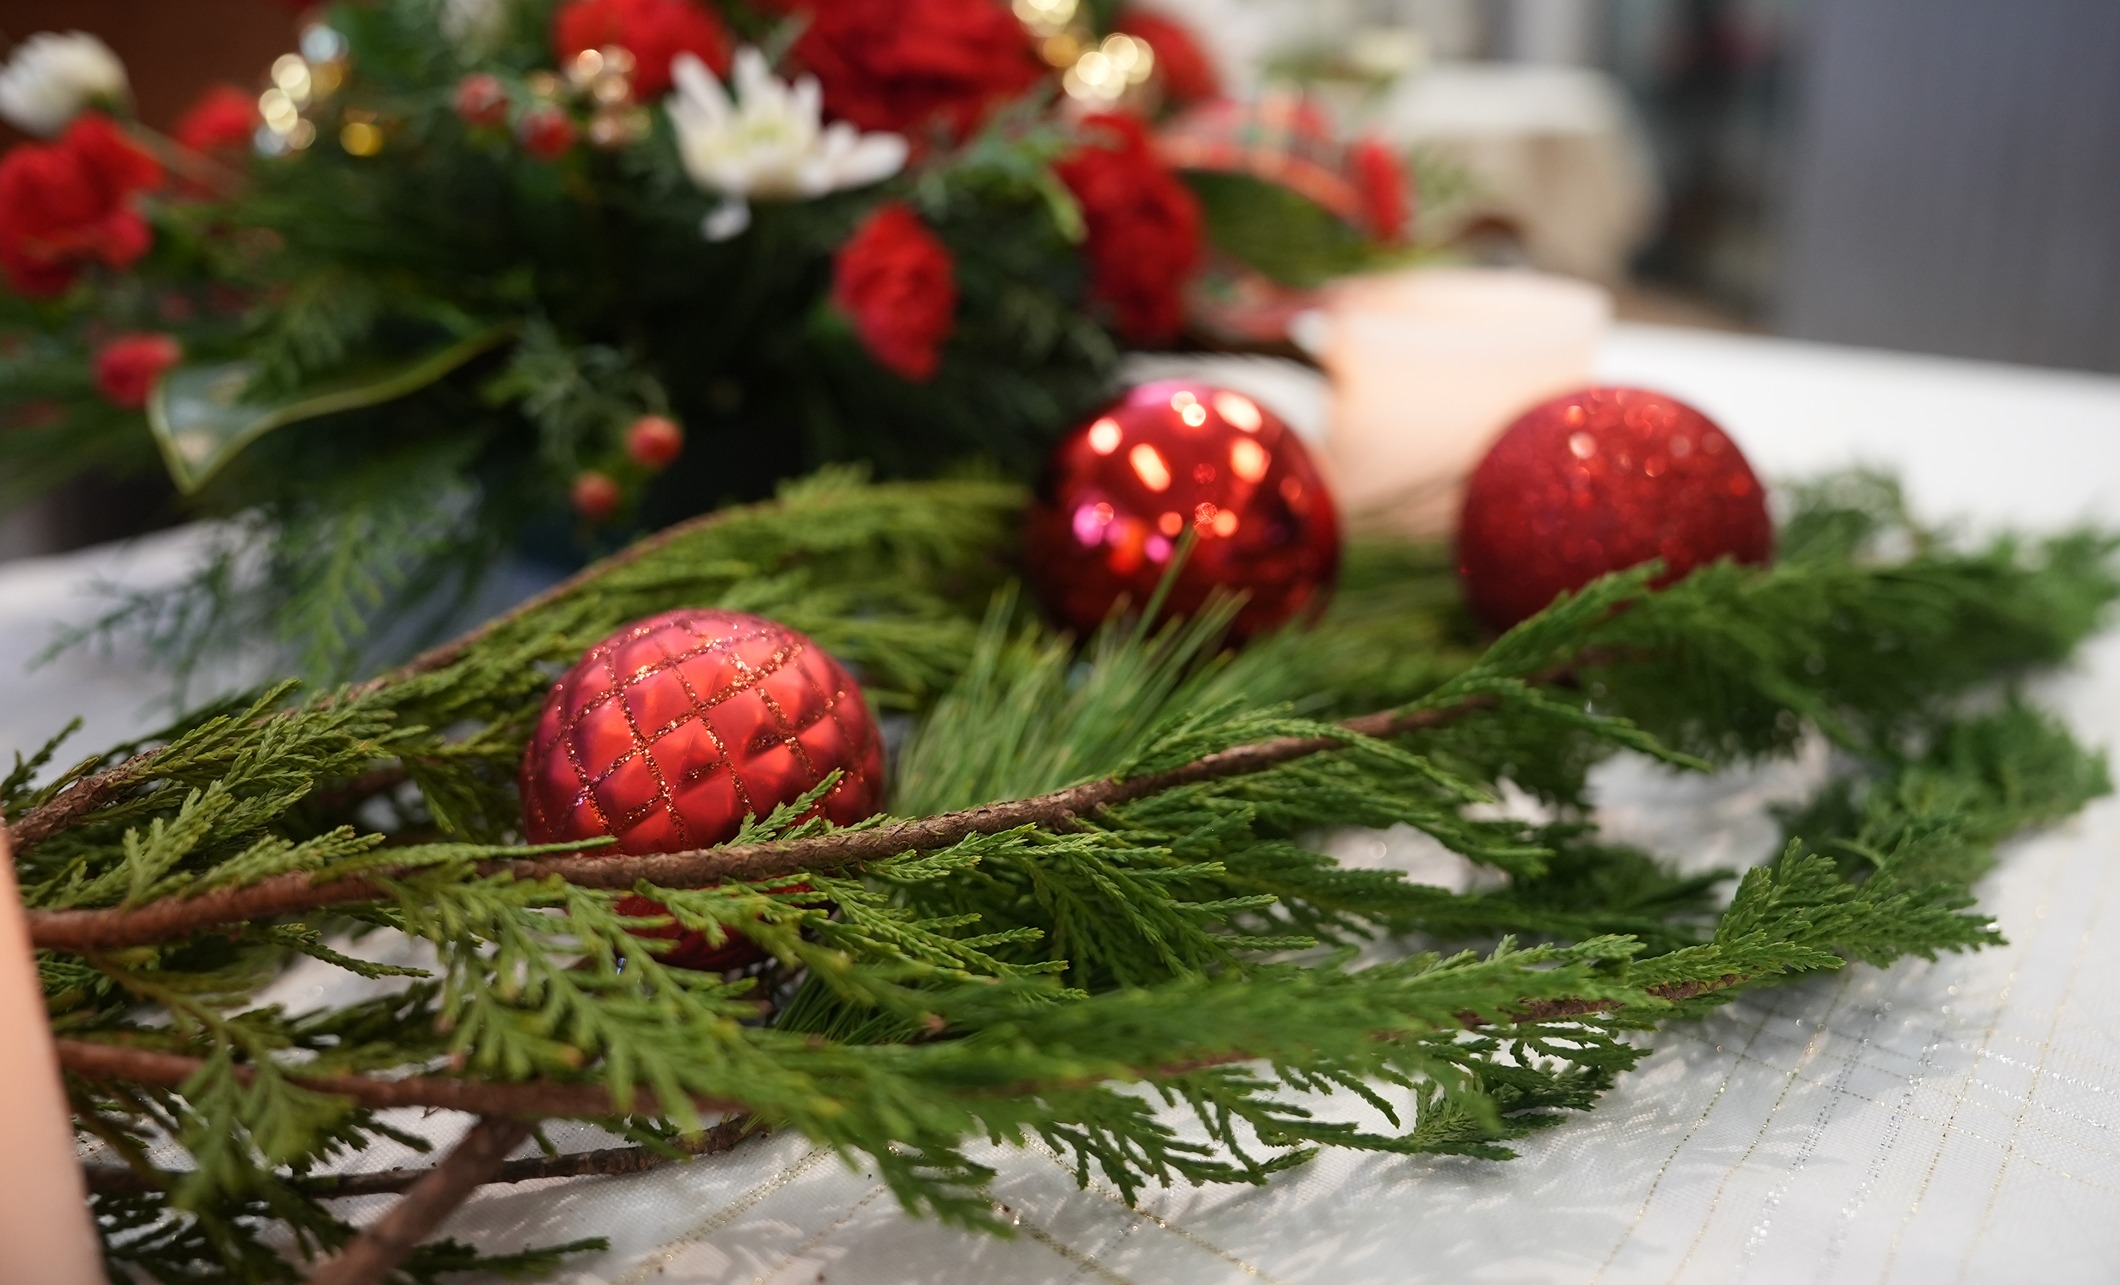 Greenery and red Christmas ornaments create a decorative centerpiece.